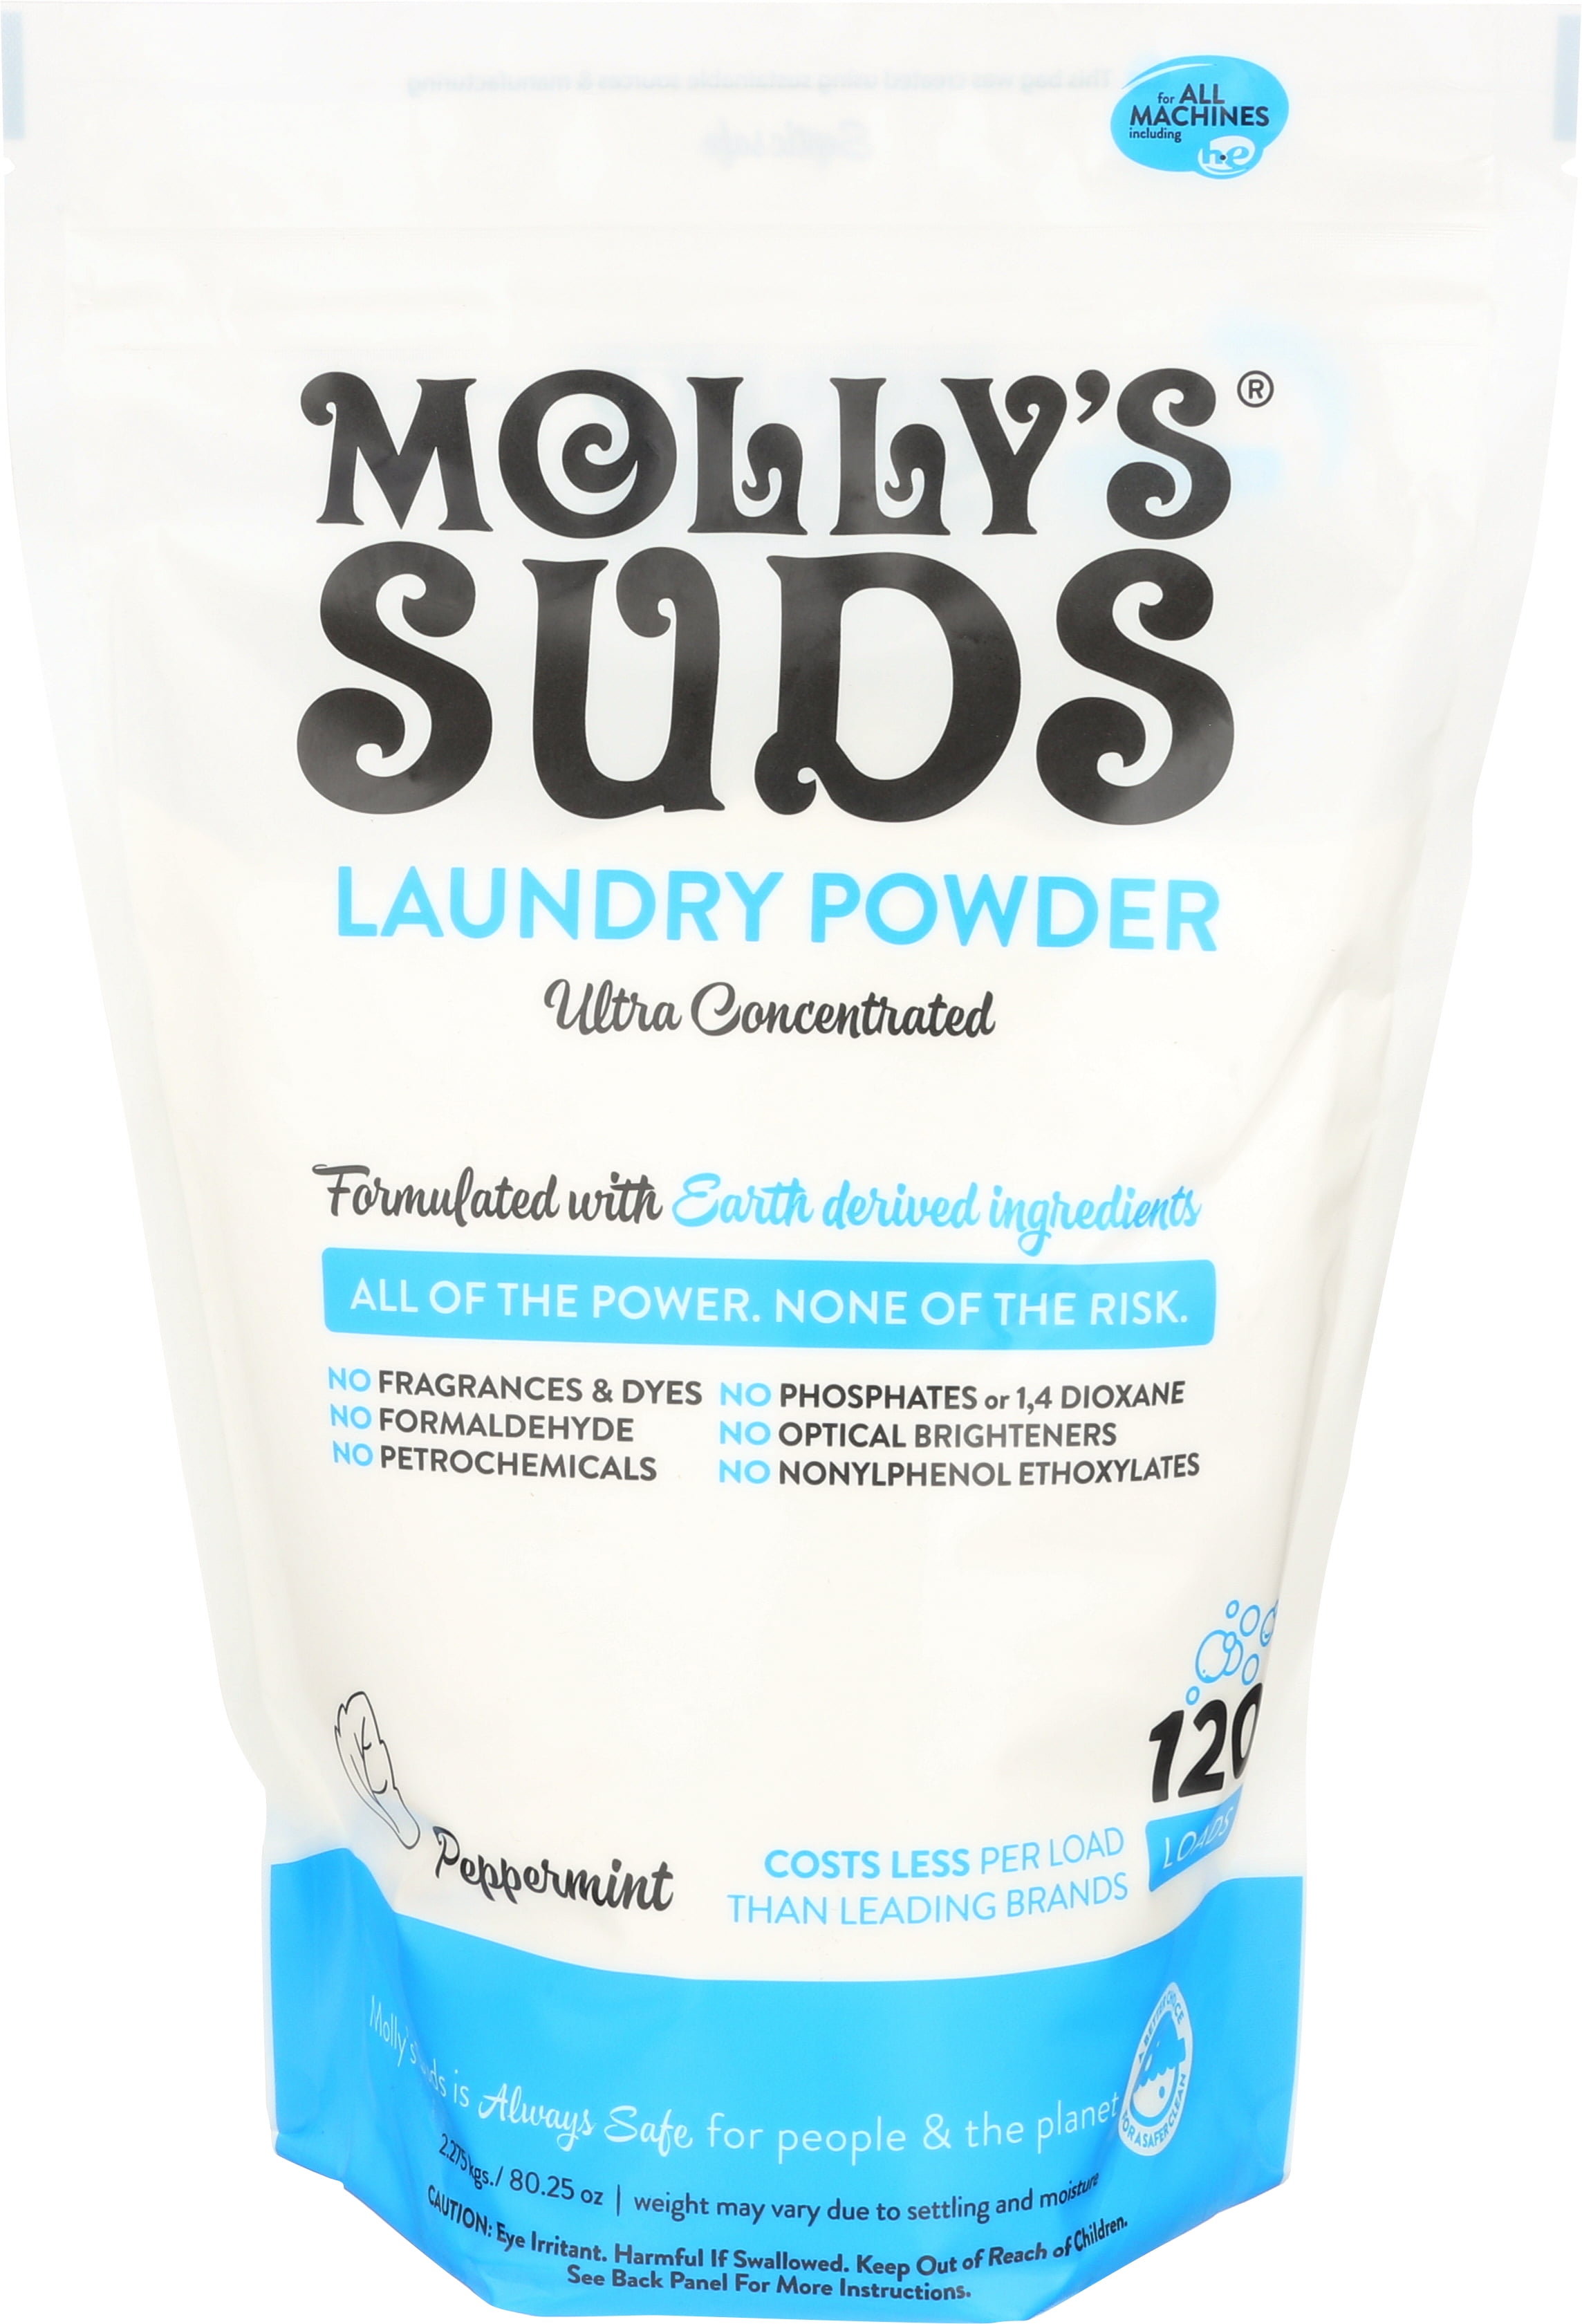 Molly's Suds Laundry Detergent 120 Loads, White